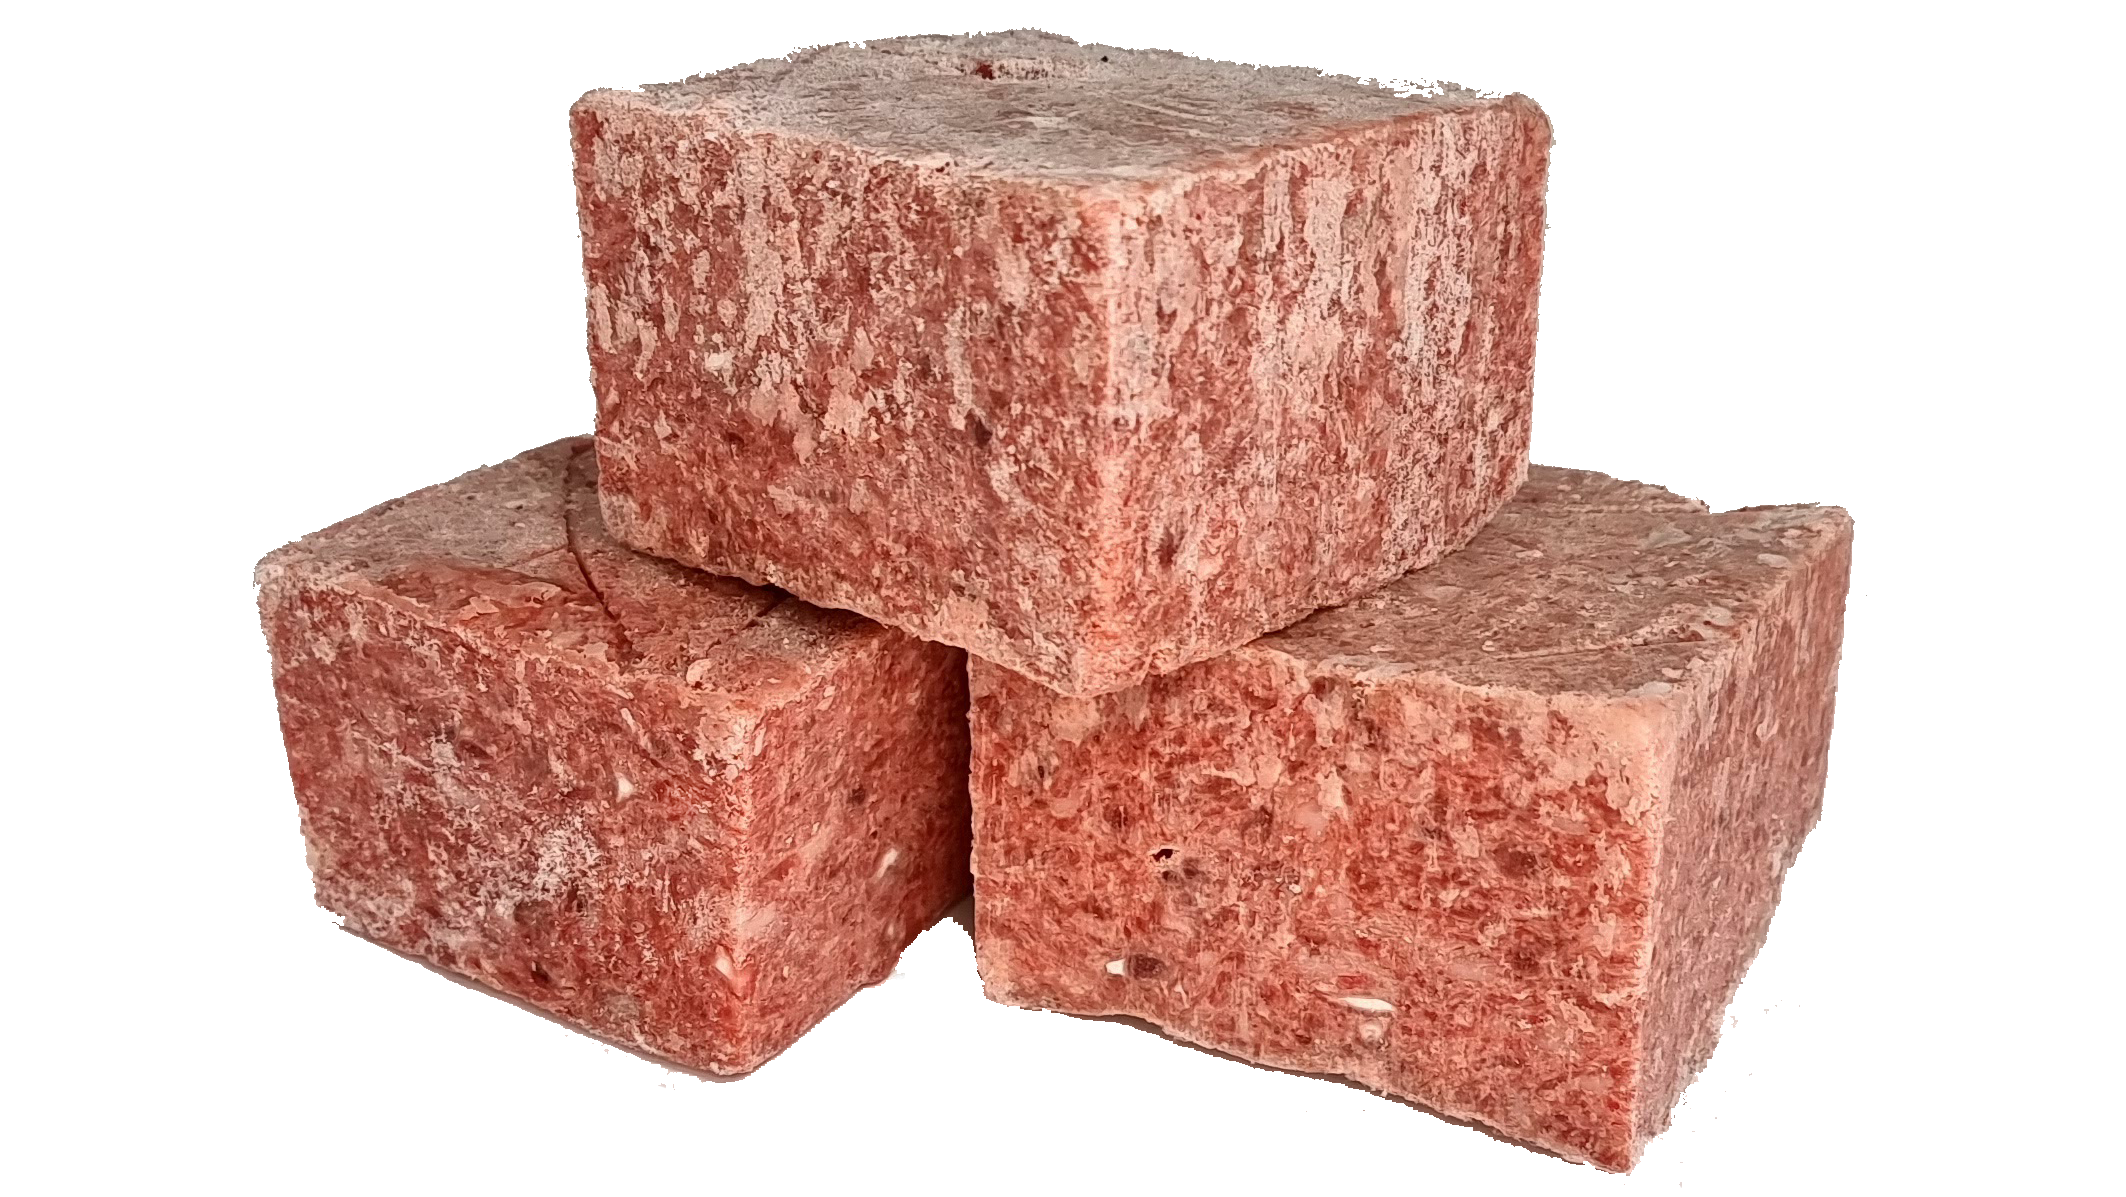 Click & Collect from MALDON - 5kgs Minced Chicken with bone - 10 x unwrapped blocks of Raw Frozen Mince